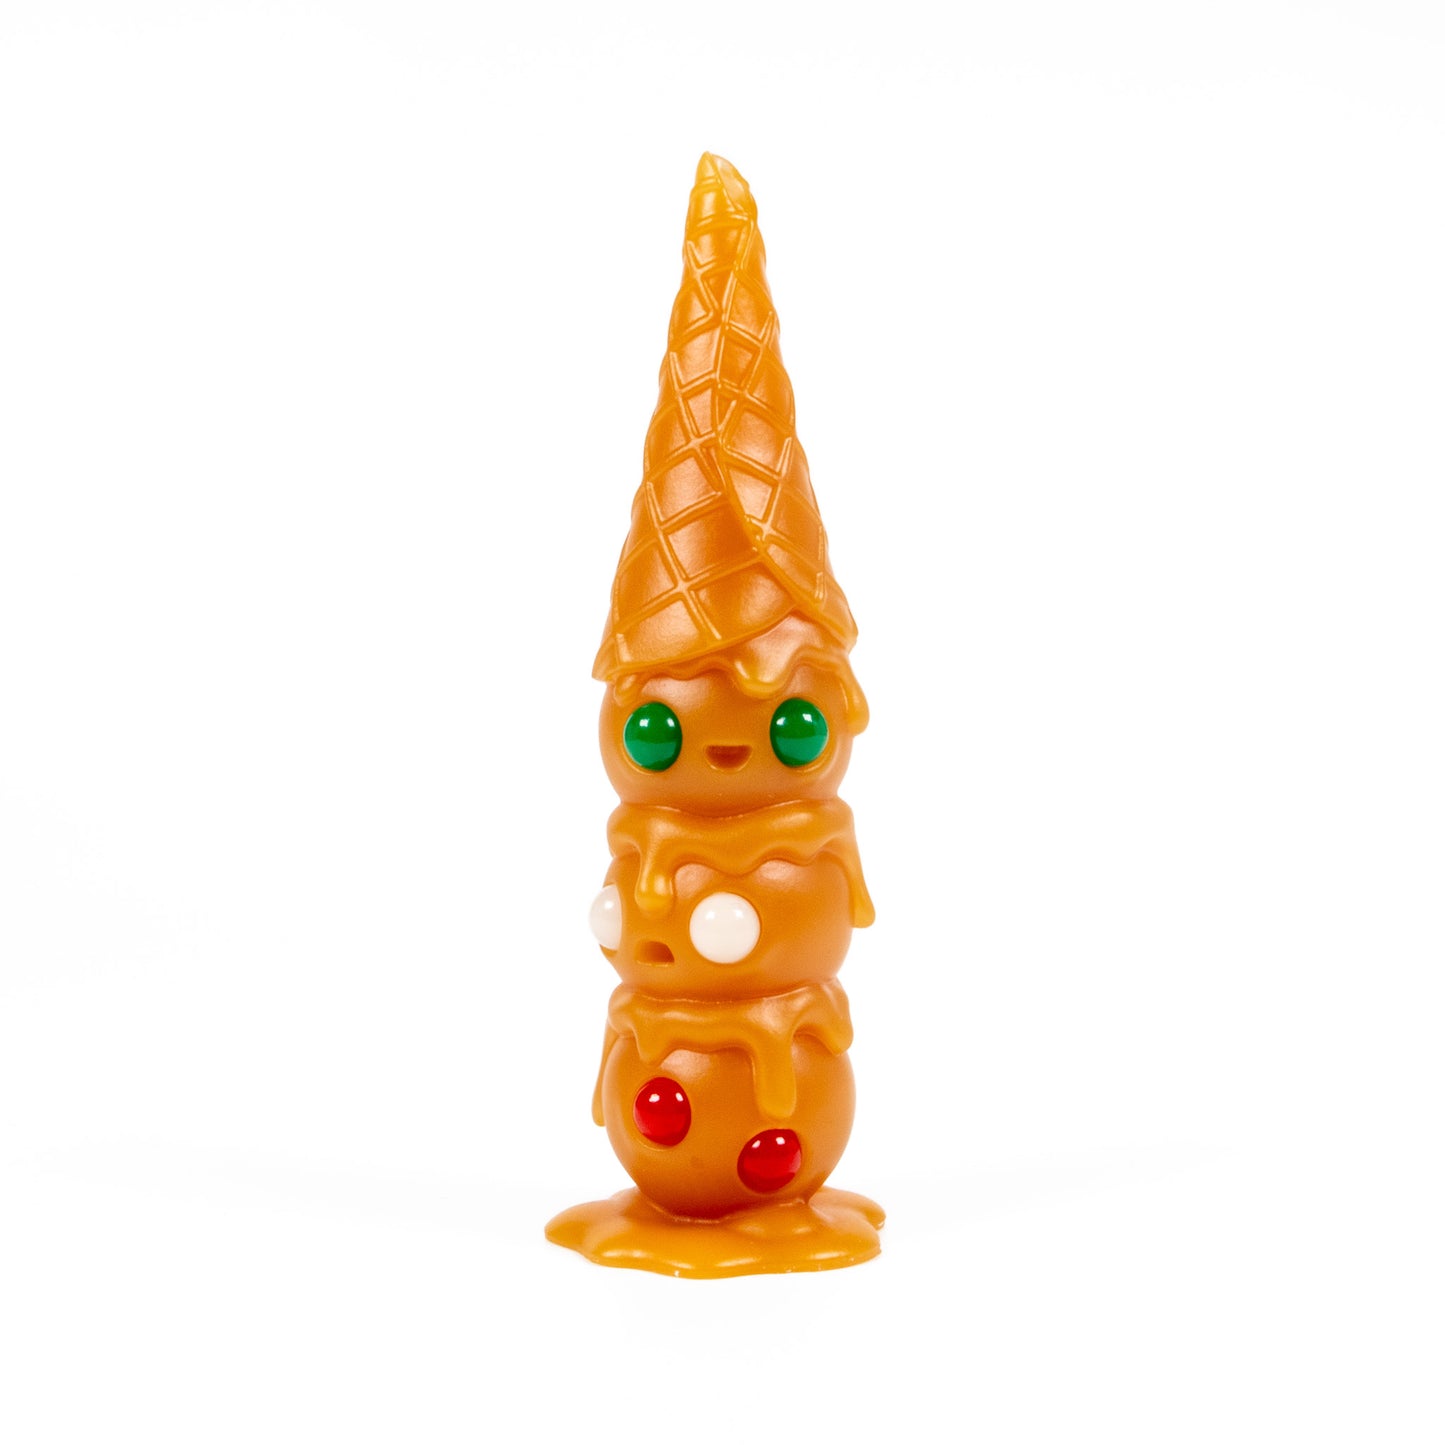 Merry Molasses - This is Wafull 3.75" Resin Figure